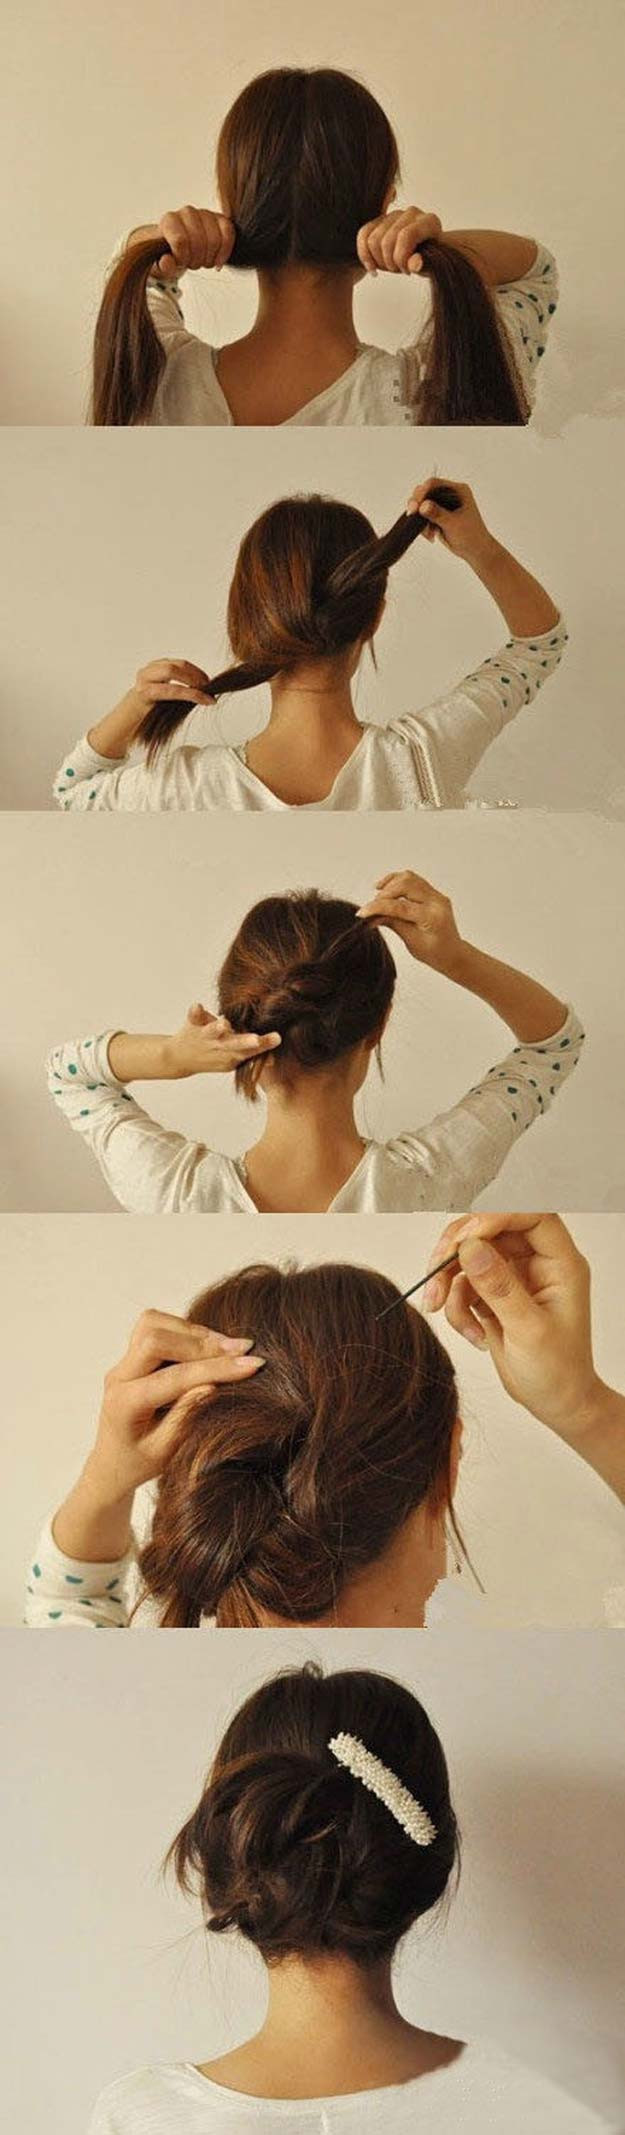 Diy Hairstyles For Long Hair
 36 Best Hairstyles for Long Hair DIY Projects for Teens